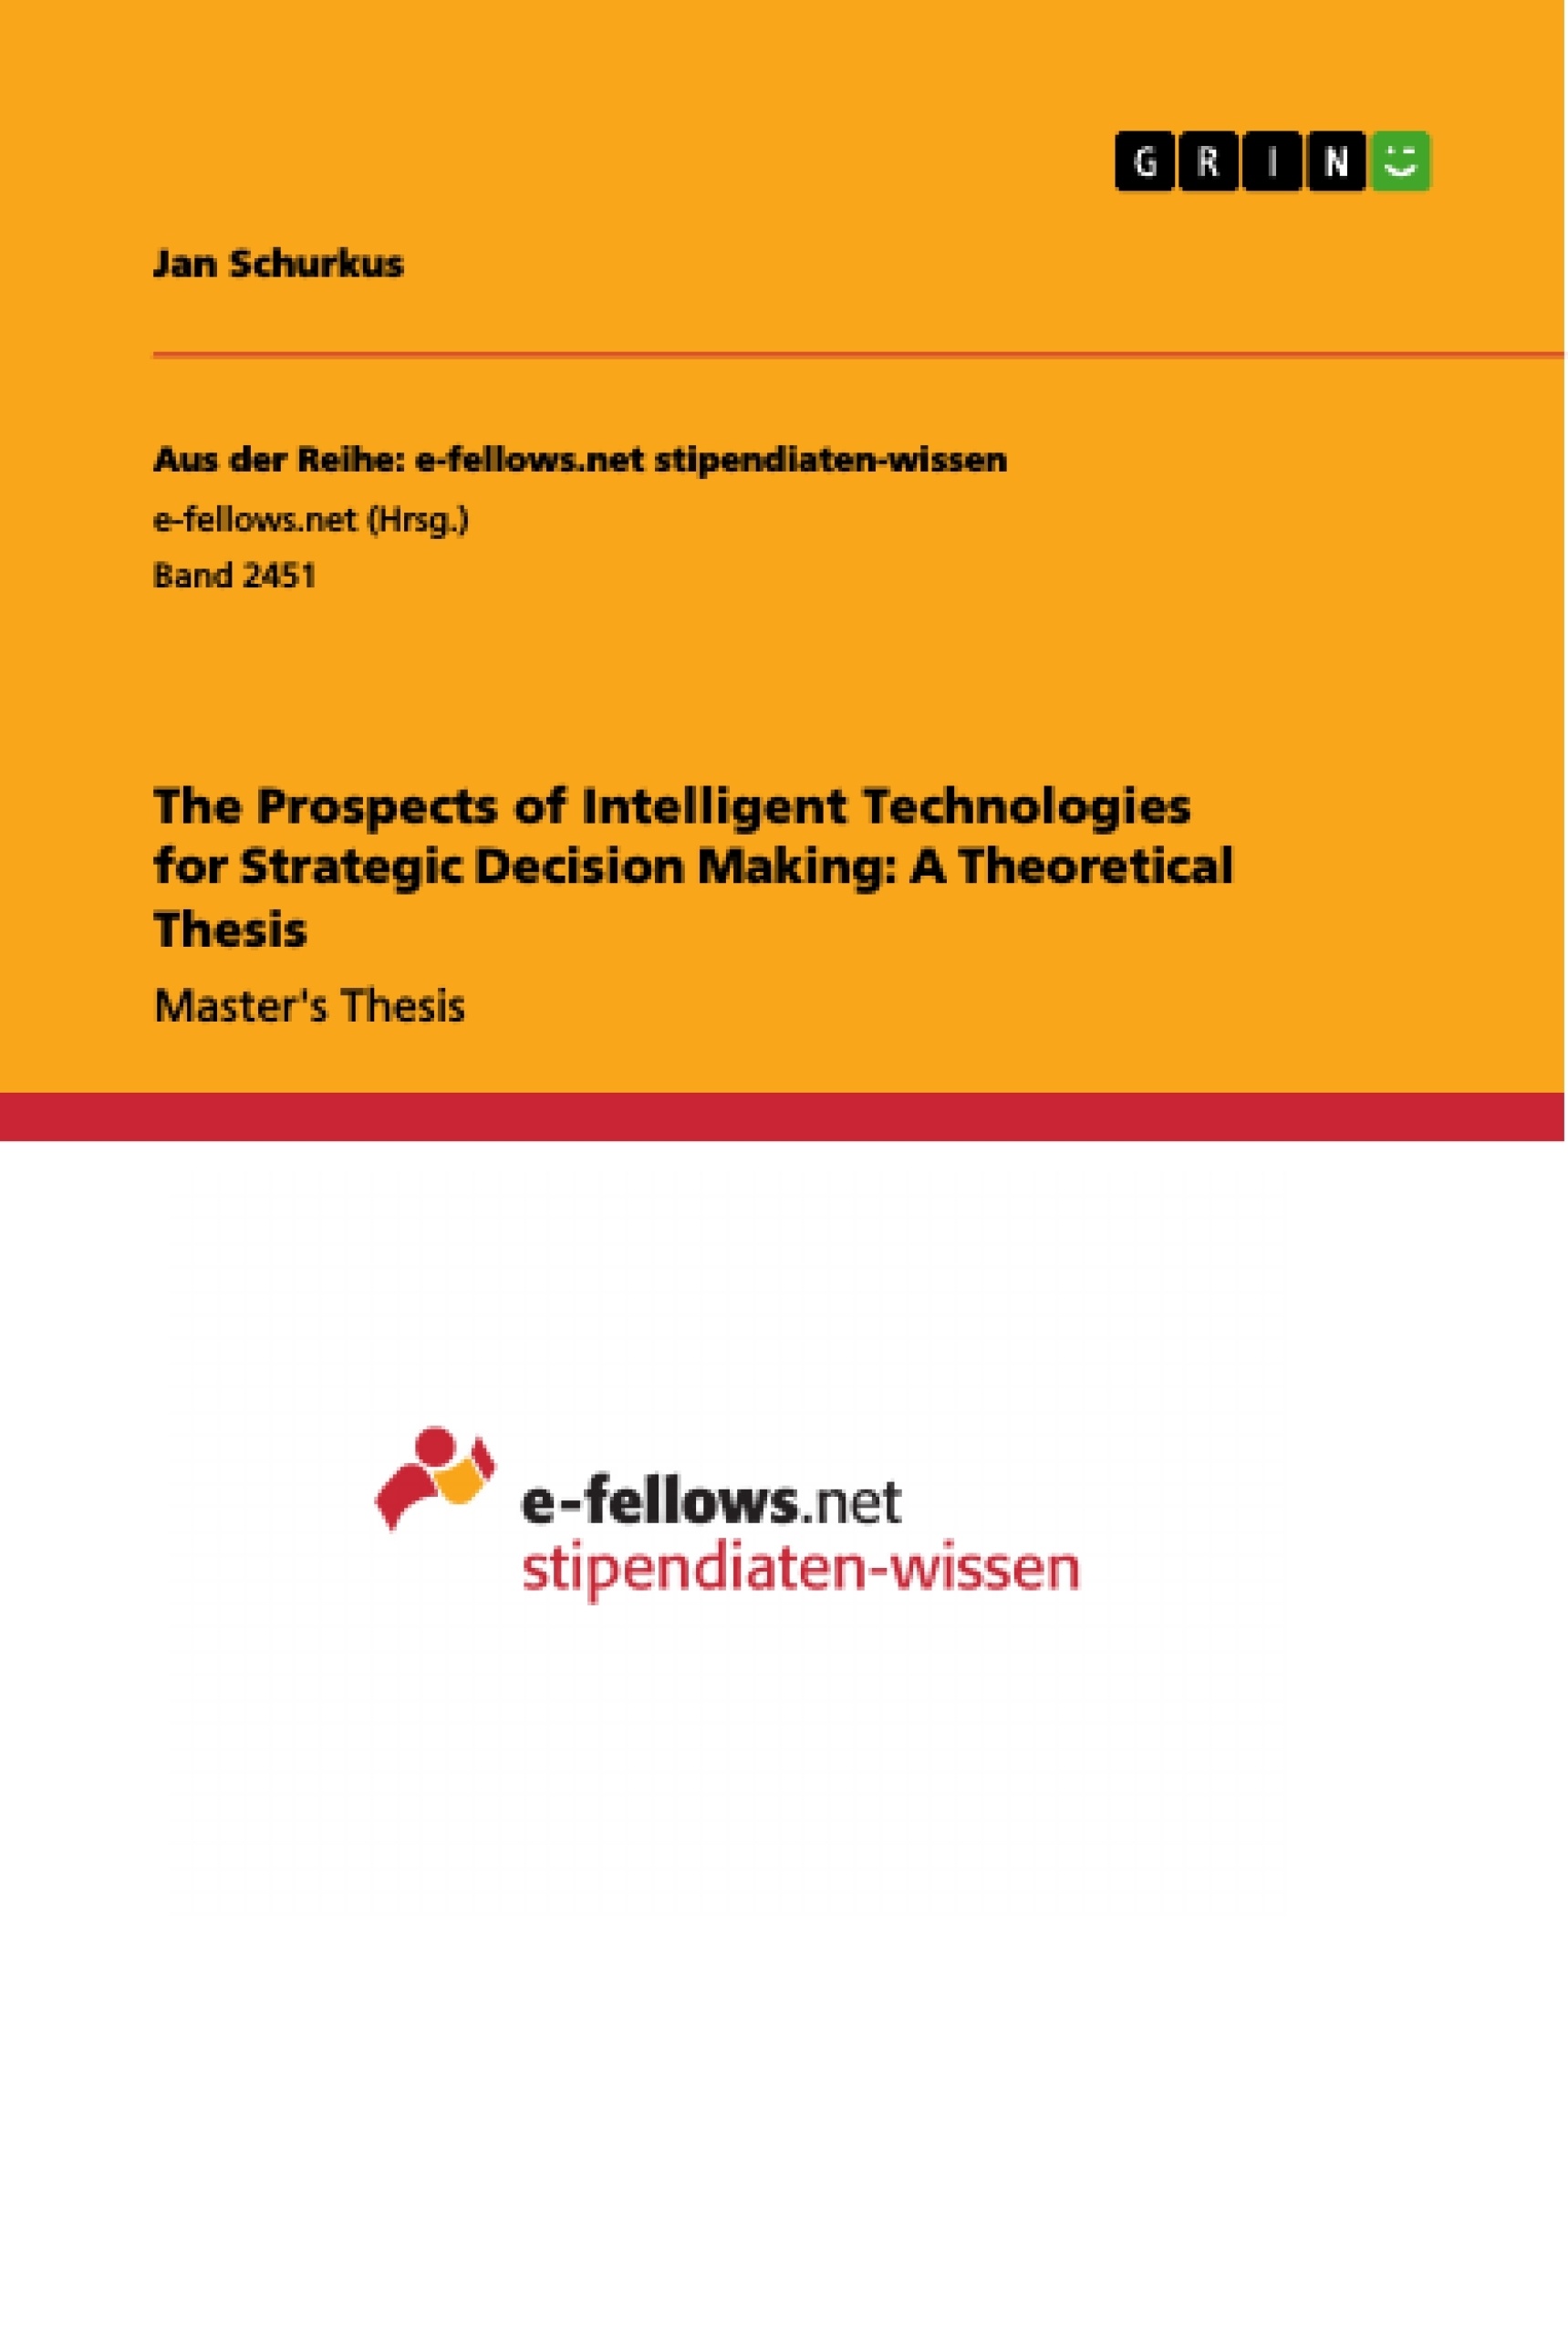 Title: The Prospects of Intelligent Technologies for Strategic Decision Making: A Theoretical Thesis